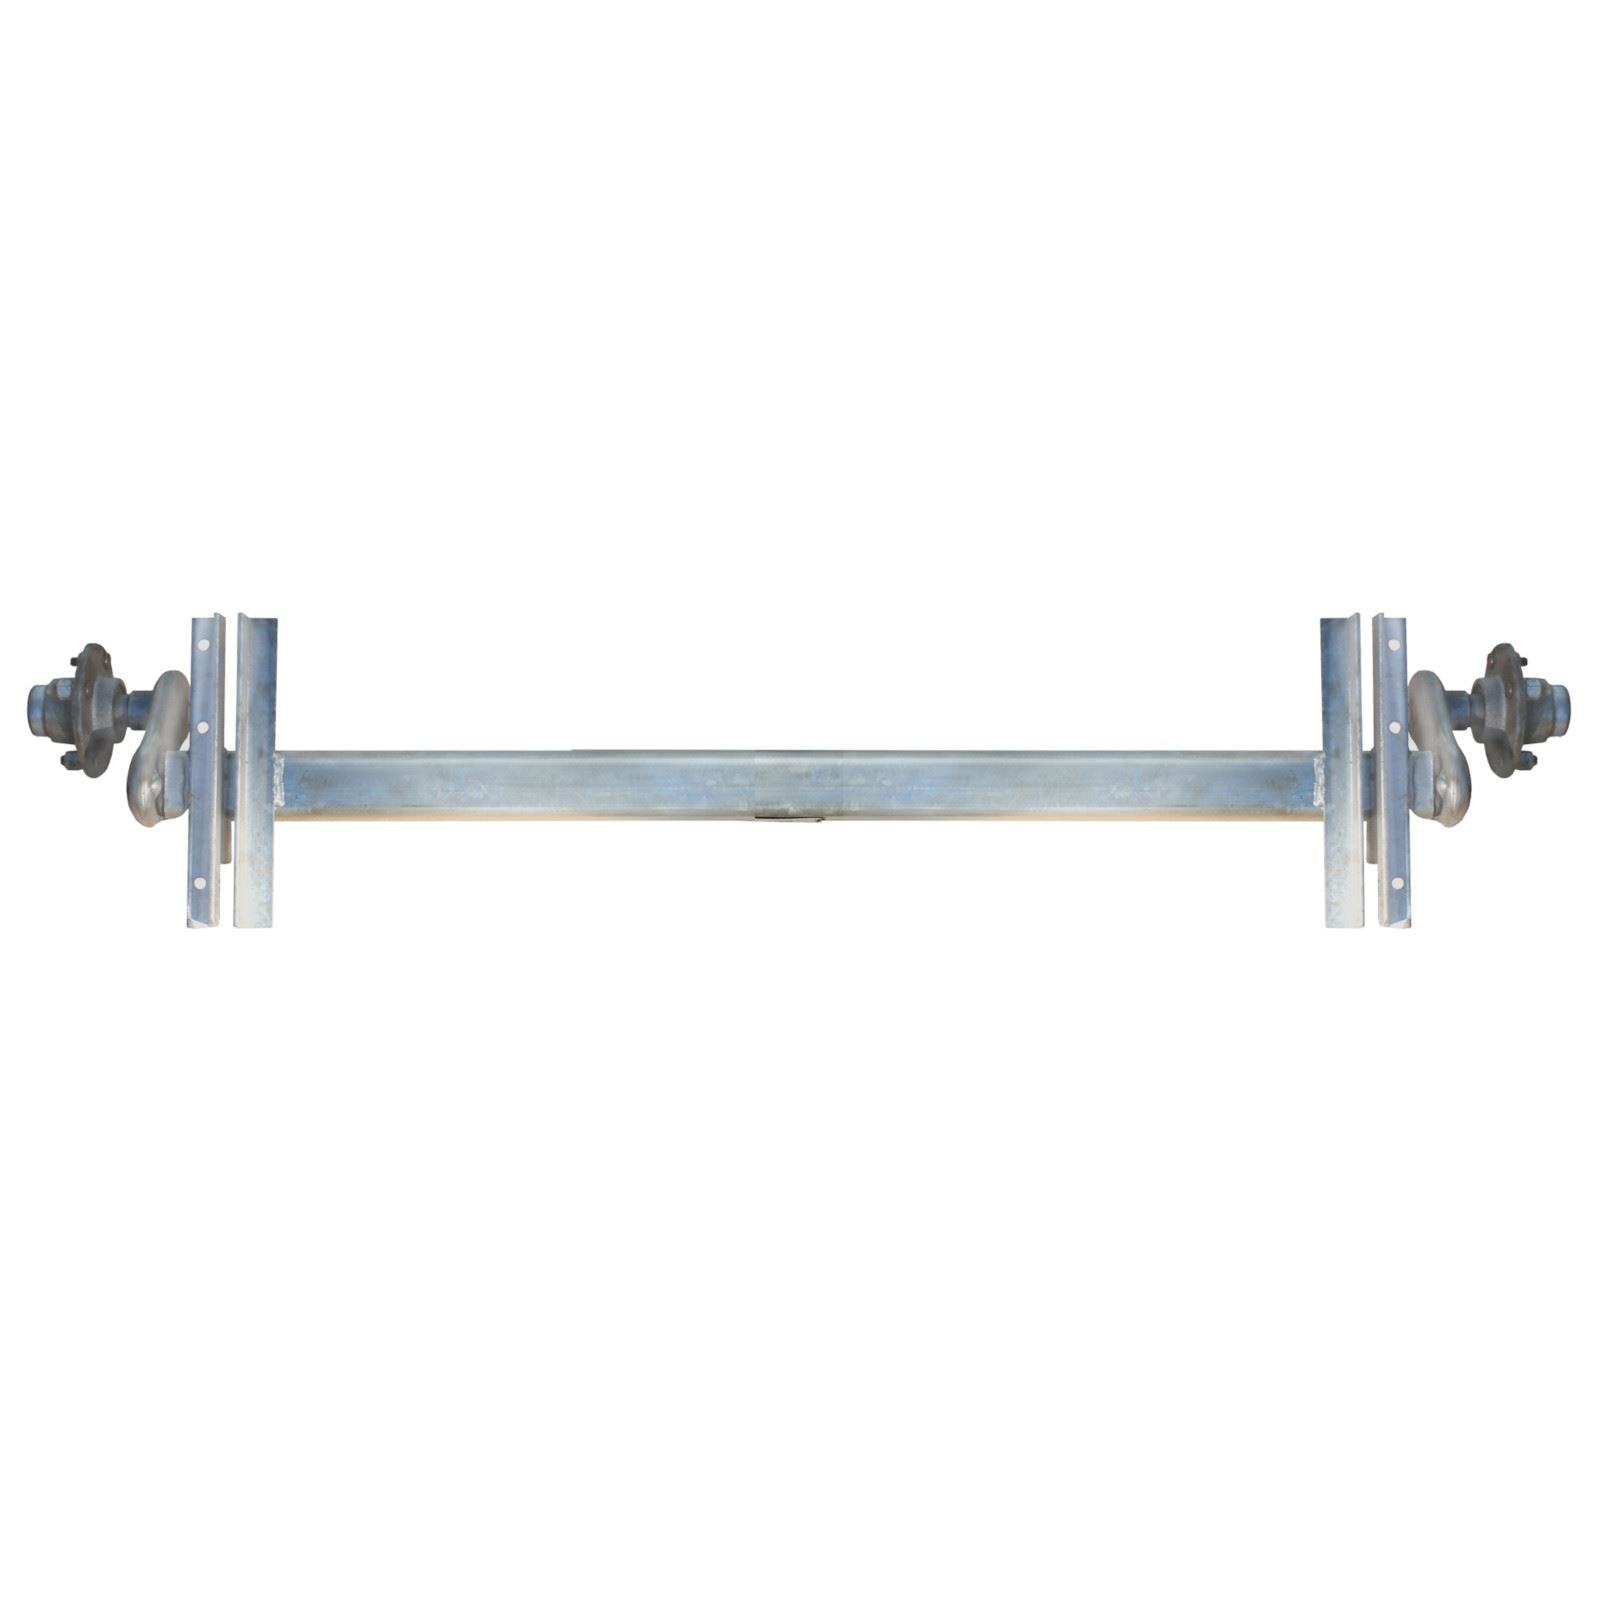 600kg Trailer Axle Suspension for Snipe Boat & Jetski Trailers with 4" PCD Hubs